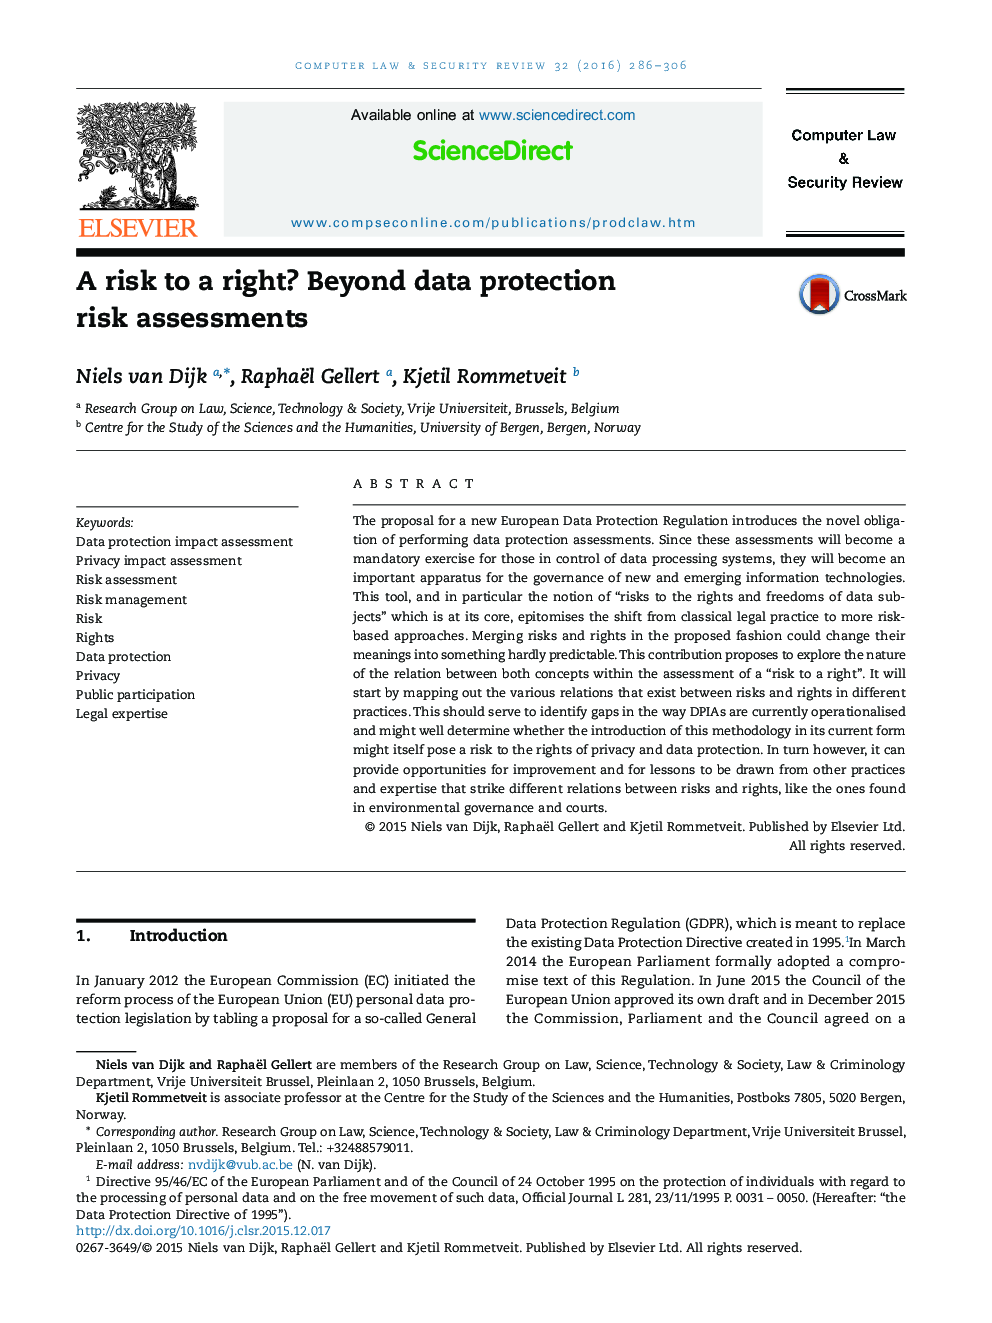 A risk to a right? Beyond data protection risk assessments 